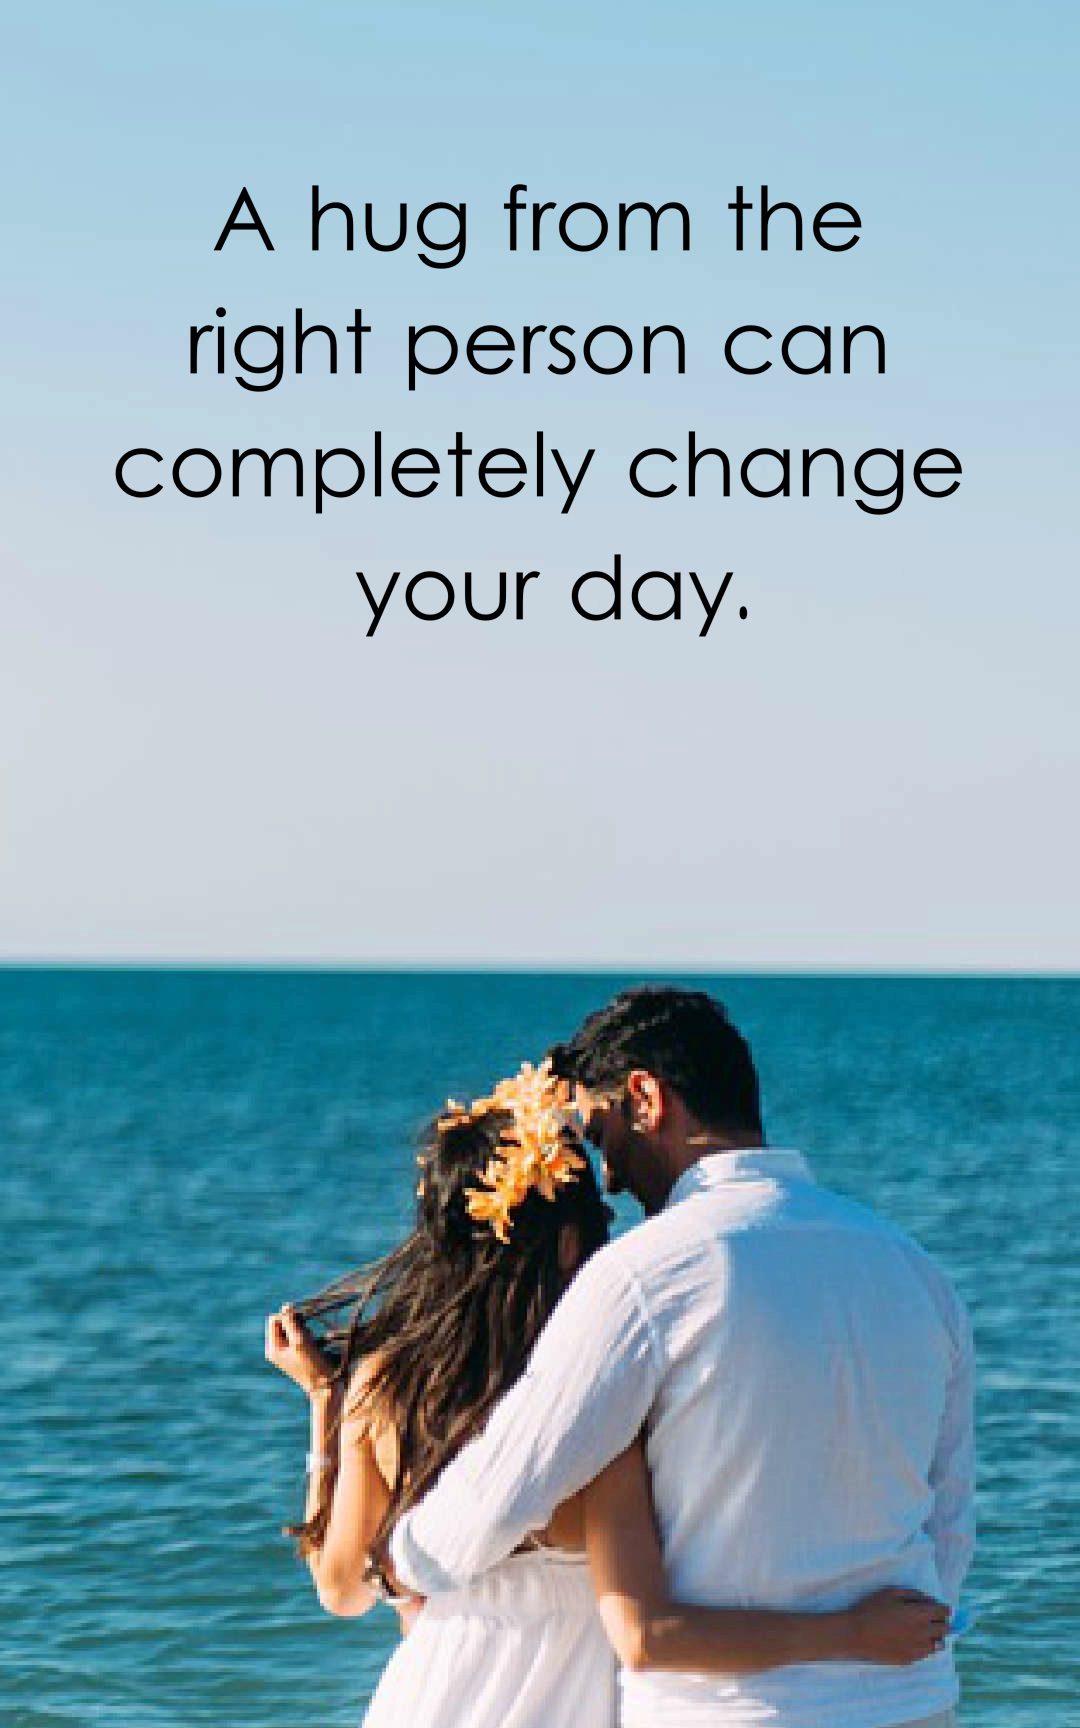 A hug from the right person can completely change your day.